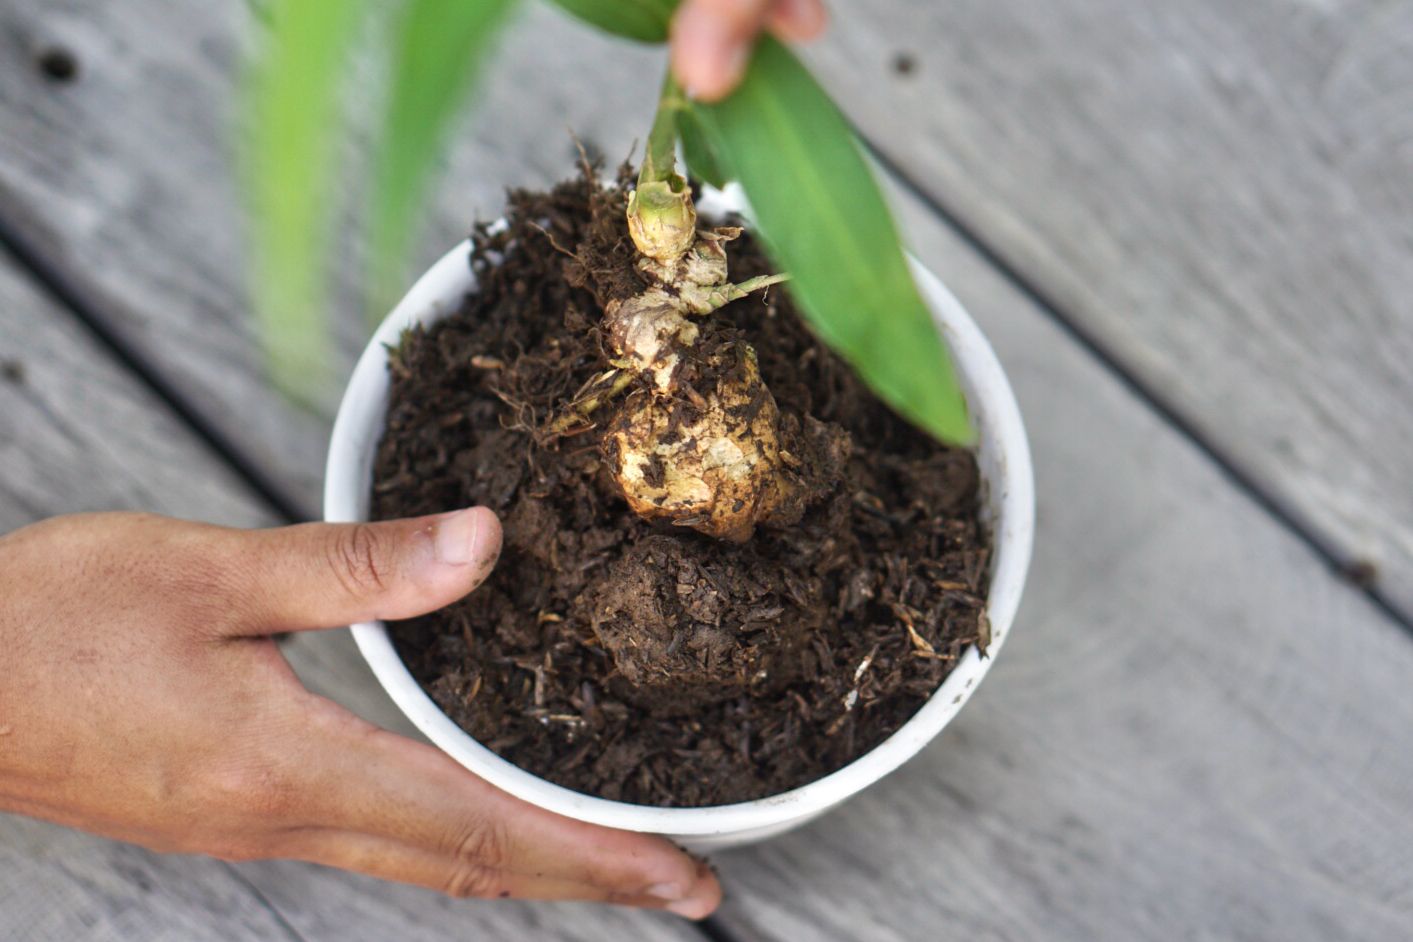 Ginger plant in white pot pulled out slightly to expose root in soil